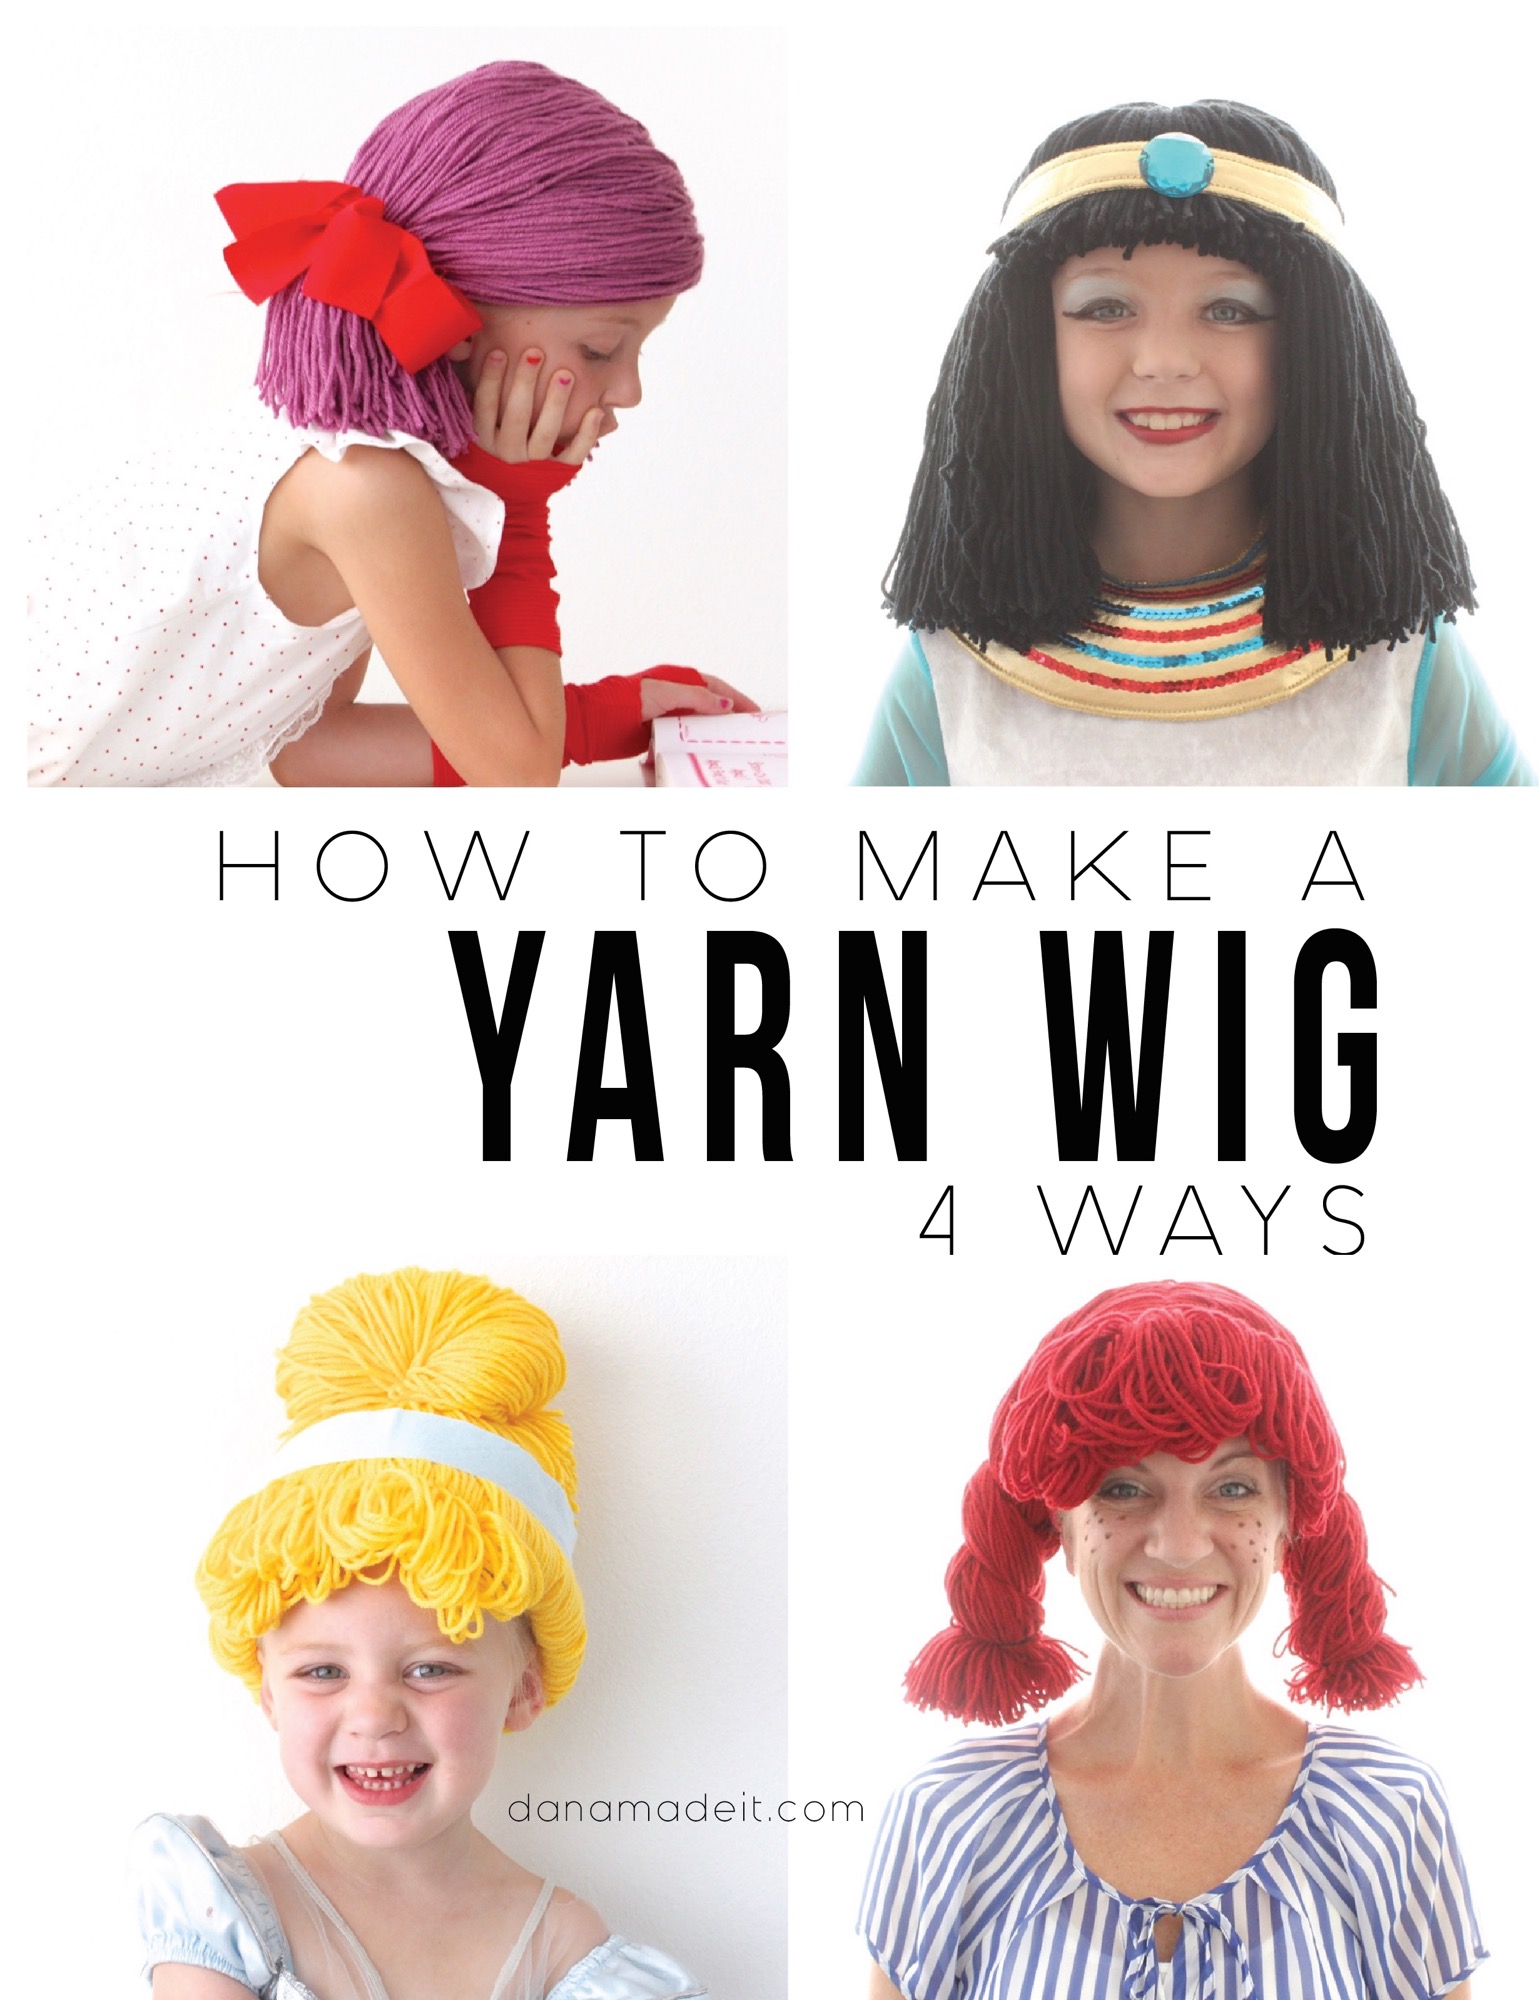 childrens play wigs